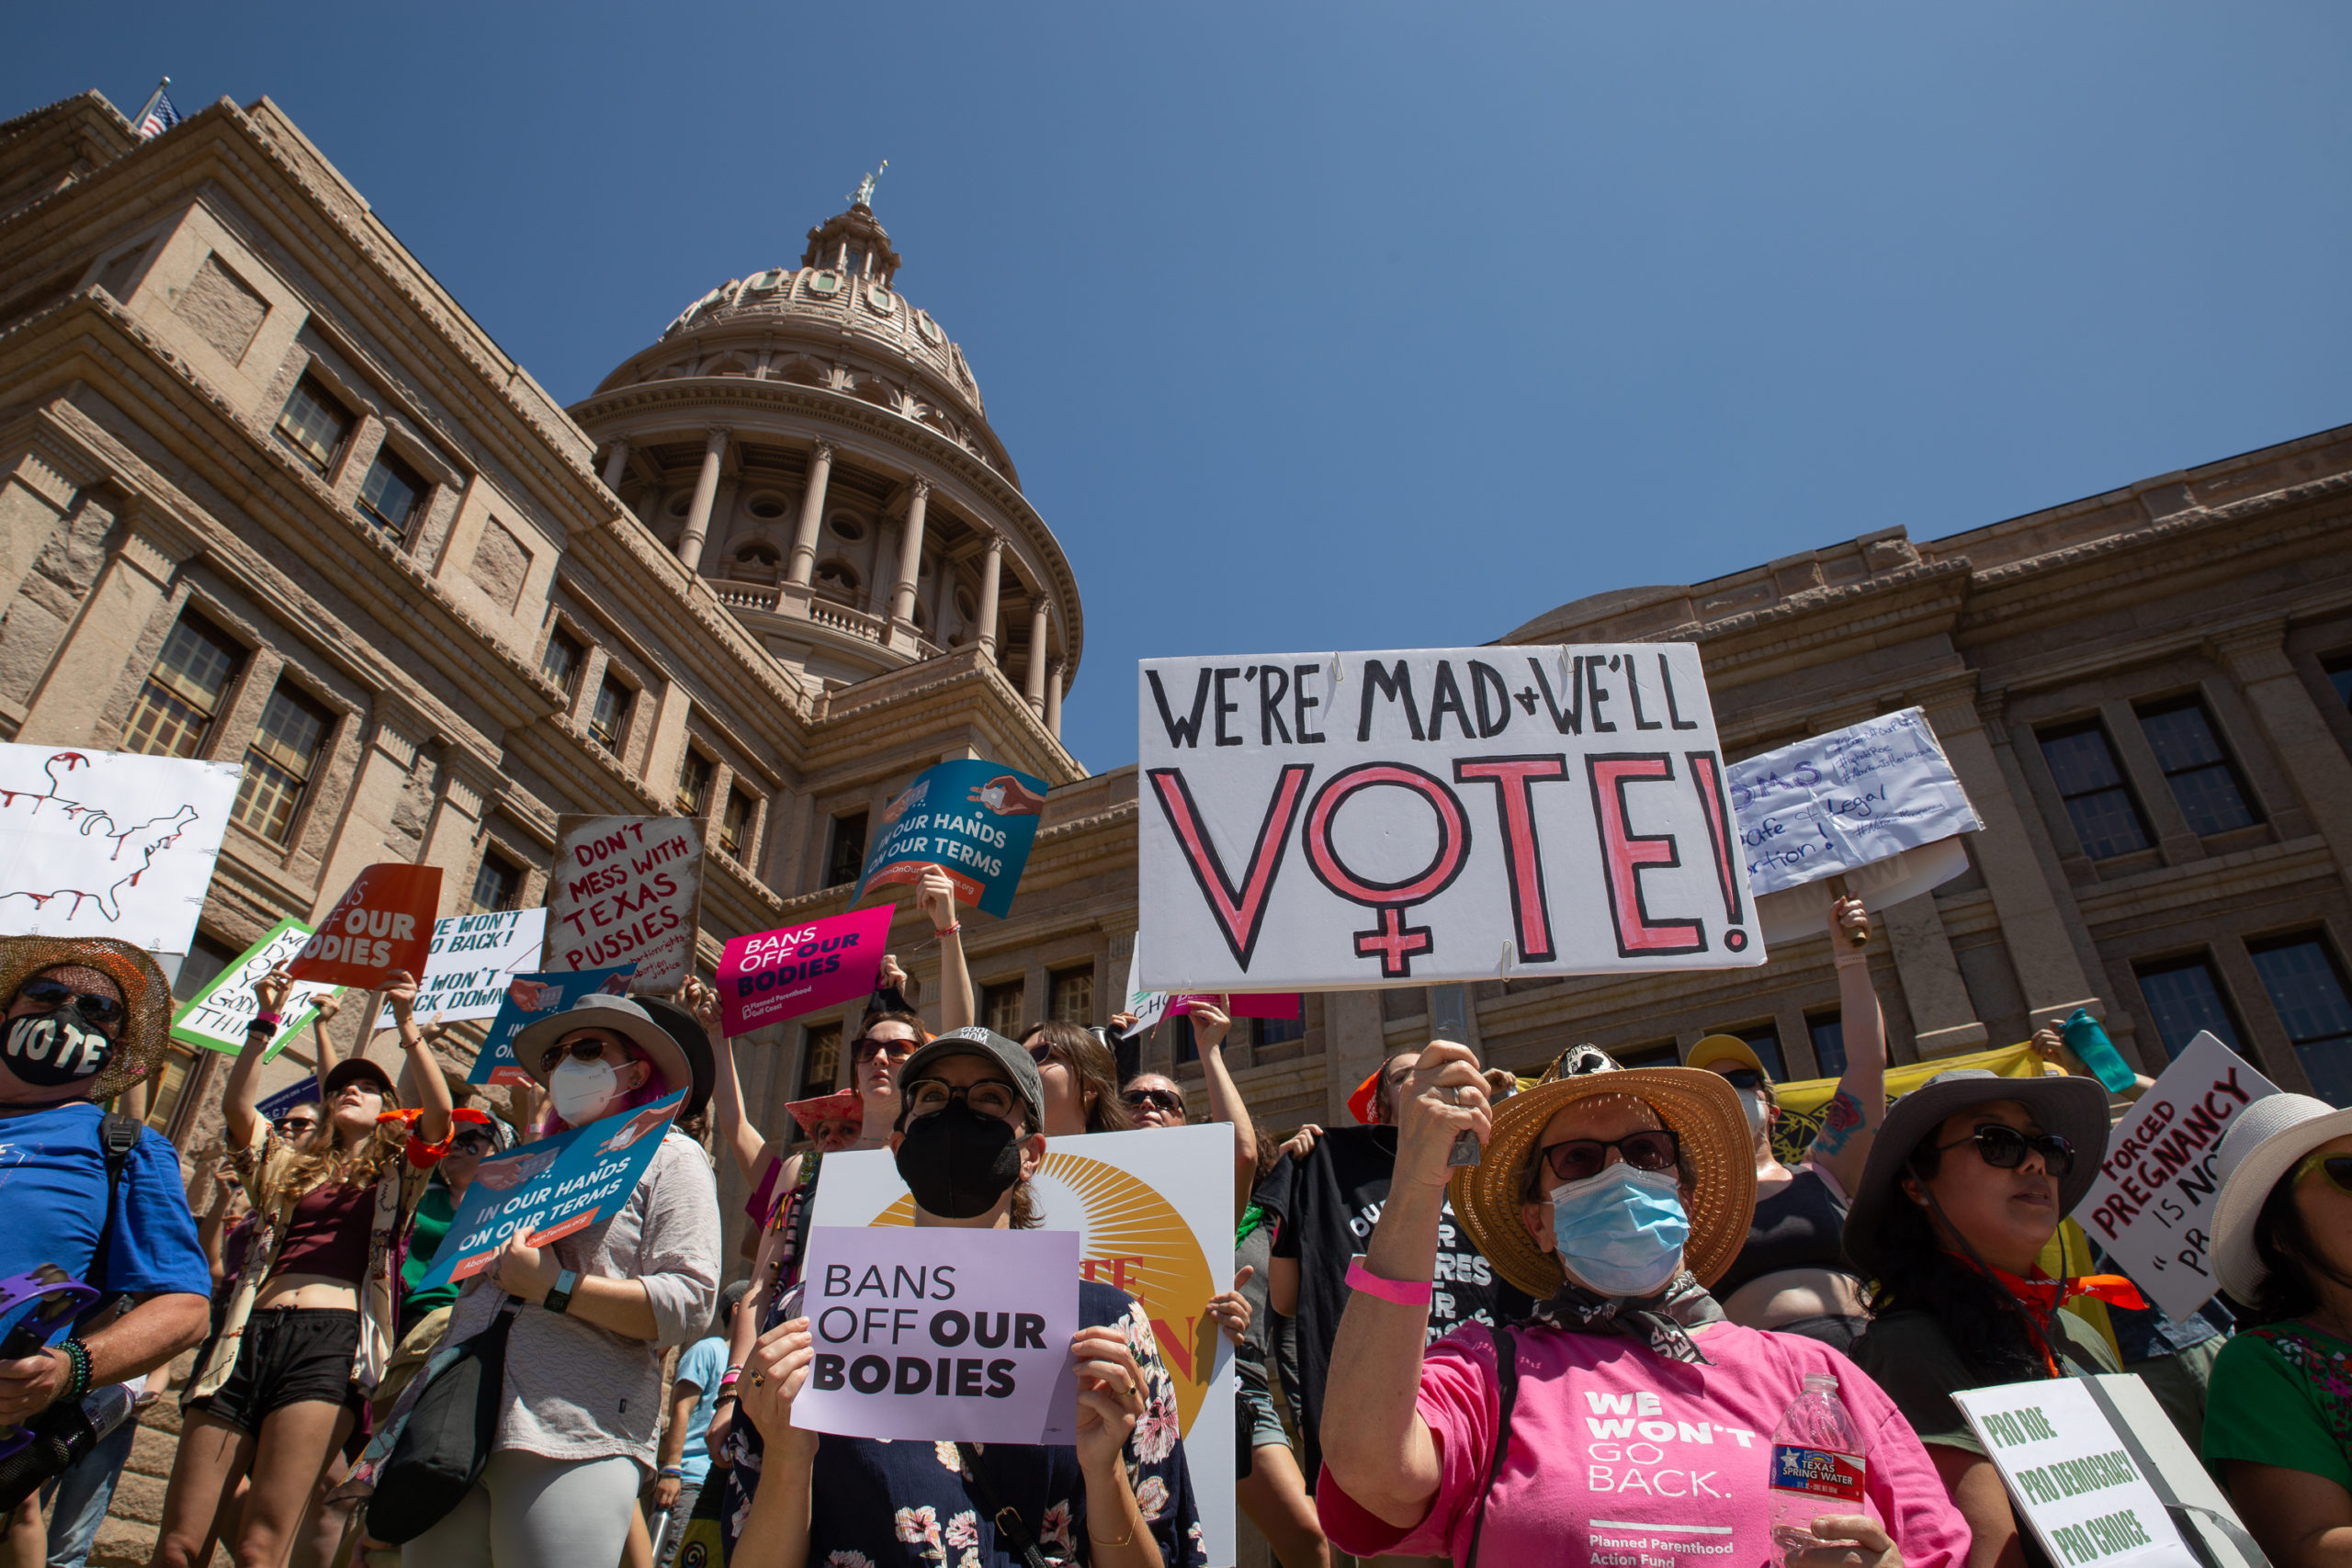 A group of reproductive rights proteters stand in front of the granite Texas capitol building, holding signs such as "Bans Off Our Bodies" and "We're Mad + We'll Vote!"